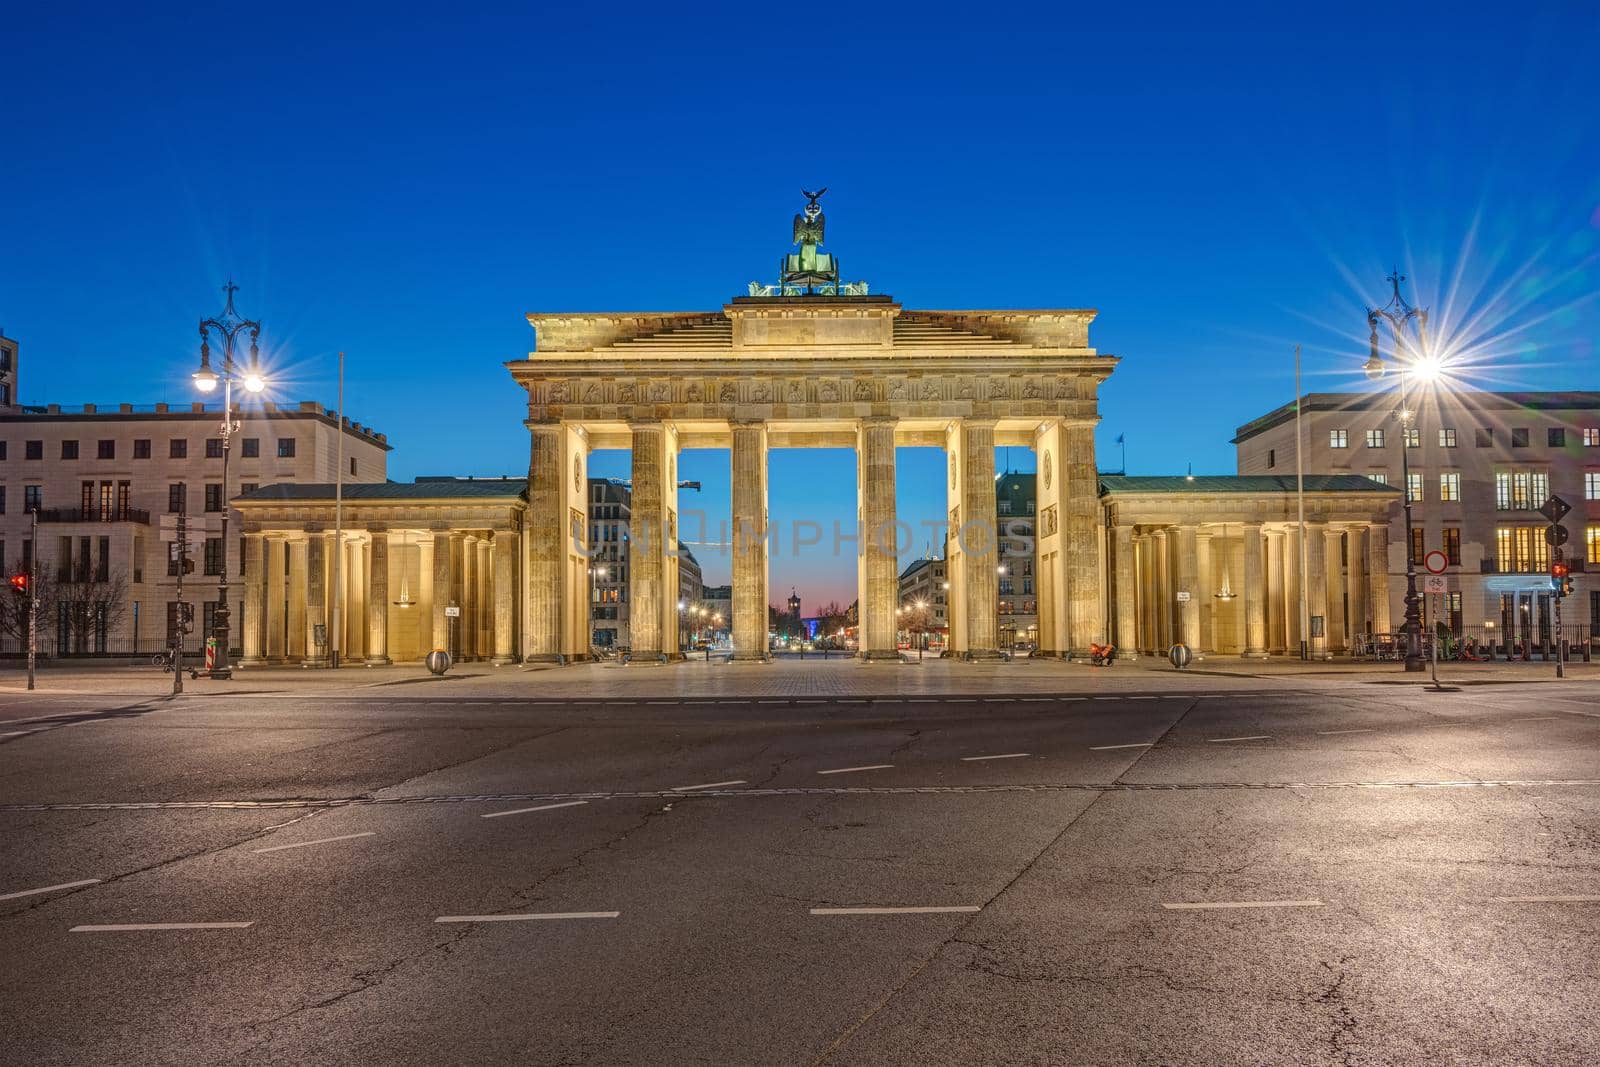 The famous Brandenburg Gate in Berlin at night by elxeneize